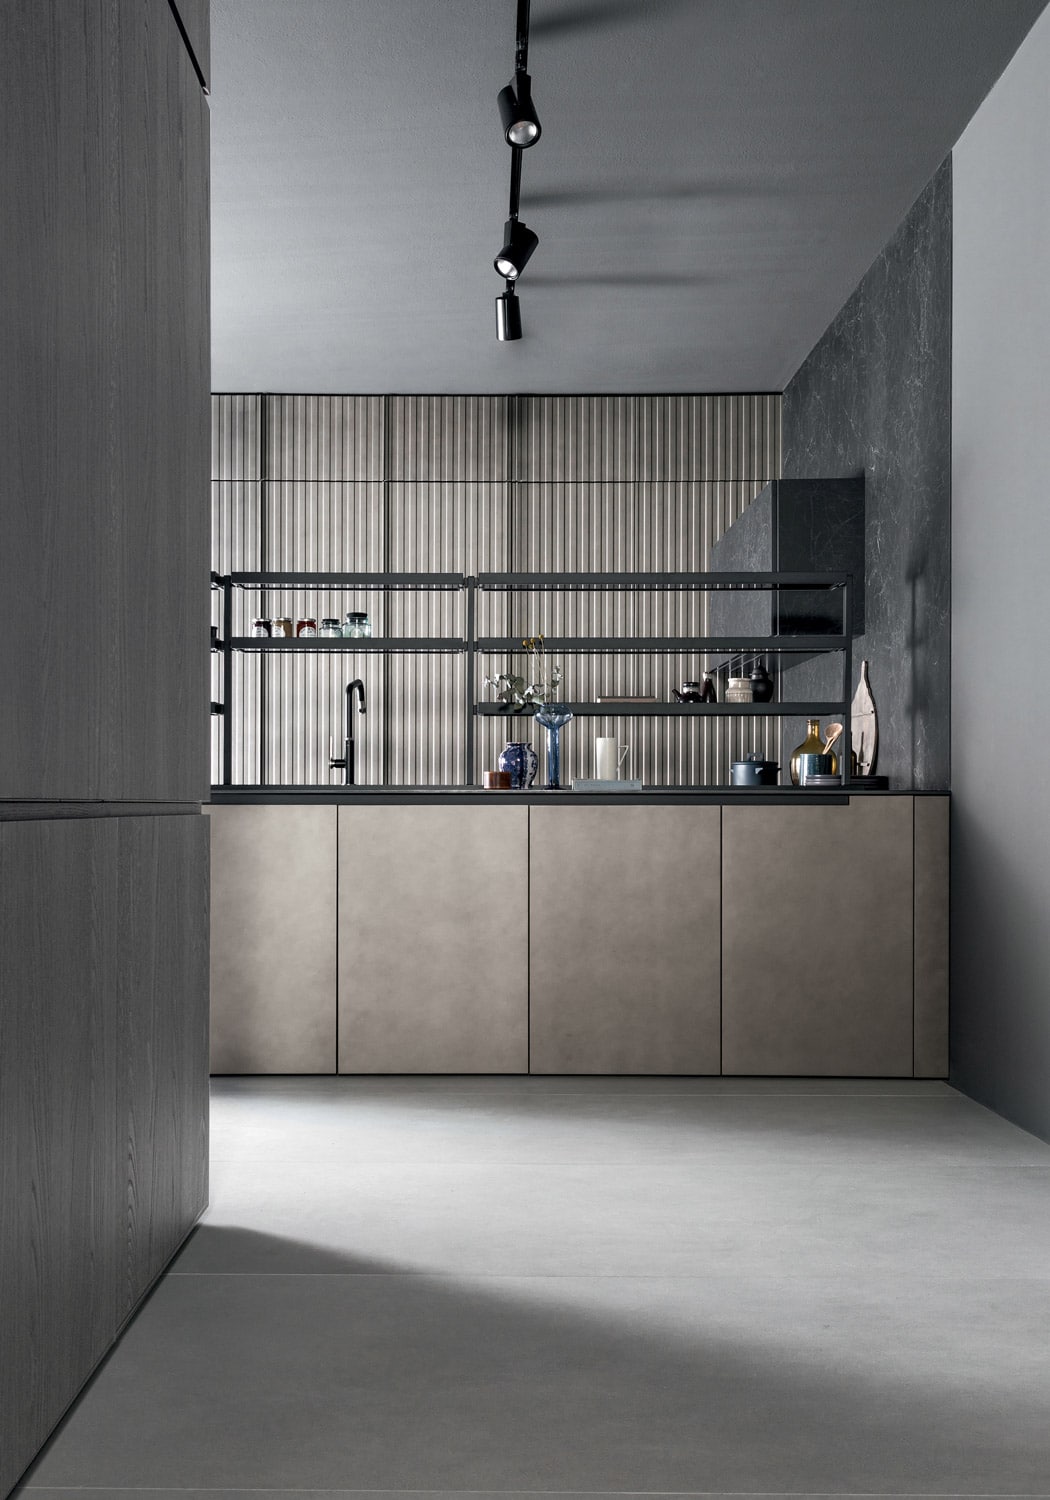 The project shows the possibility to use a single material in two different ways within the same kitchen. The lacquered Cast Iron is used on both flat and ribbed doors to add variety without introducing another finish.